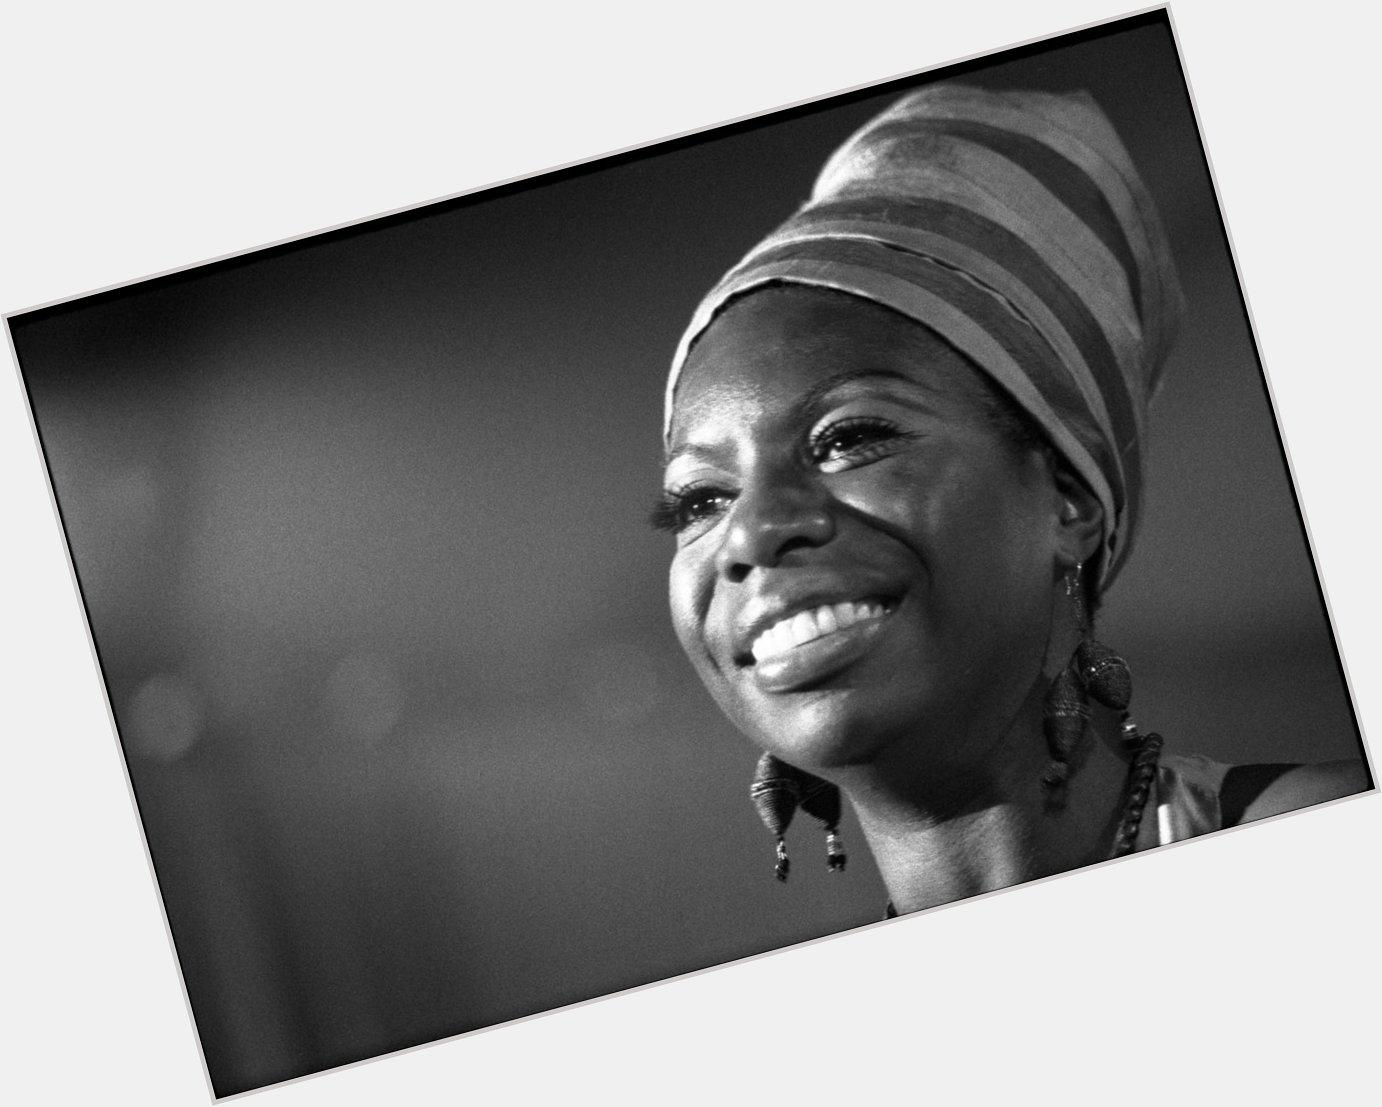 The High Priestess of Soul, Nina Simone would have been 87 today. Happy Birthday, Nina 